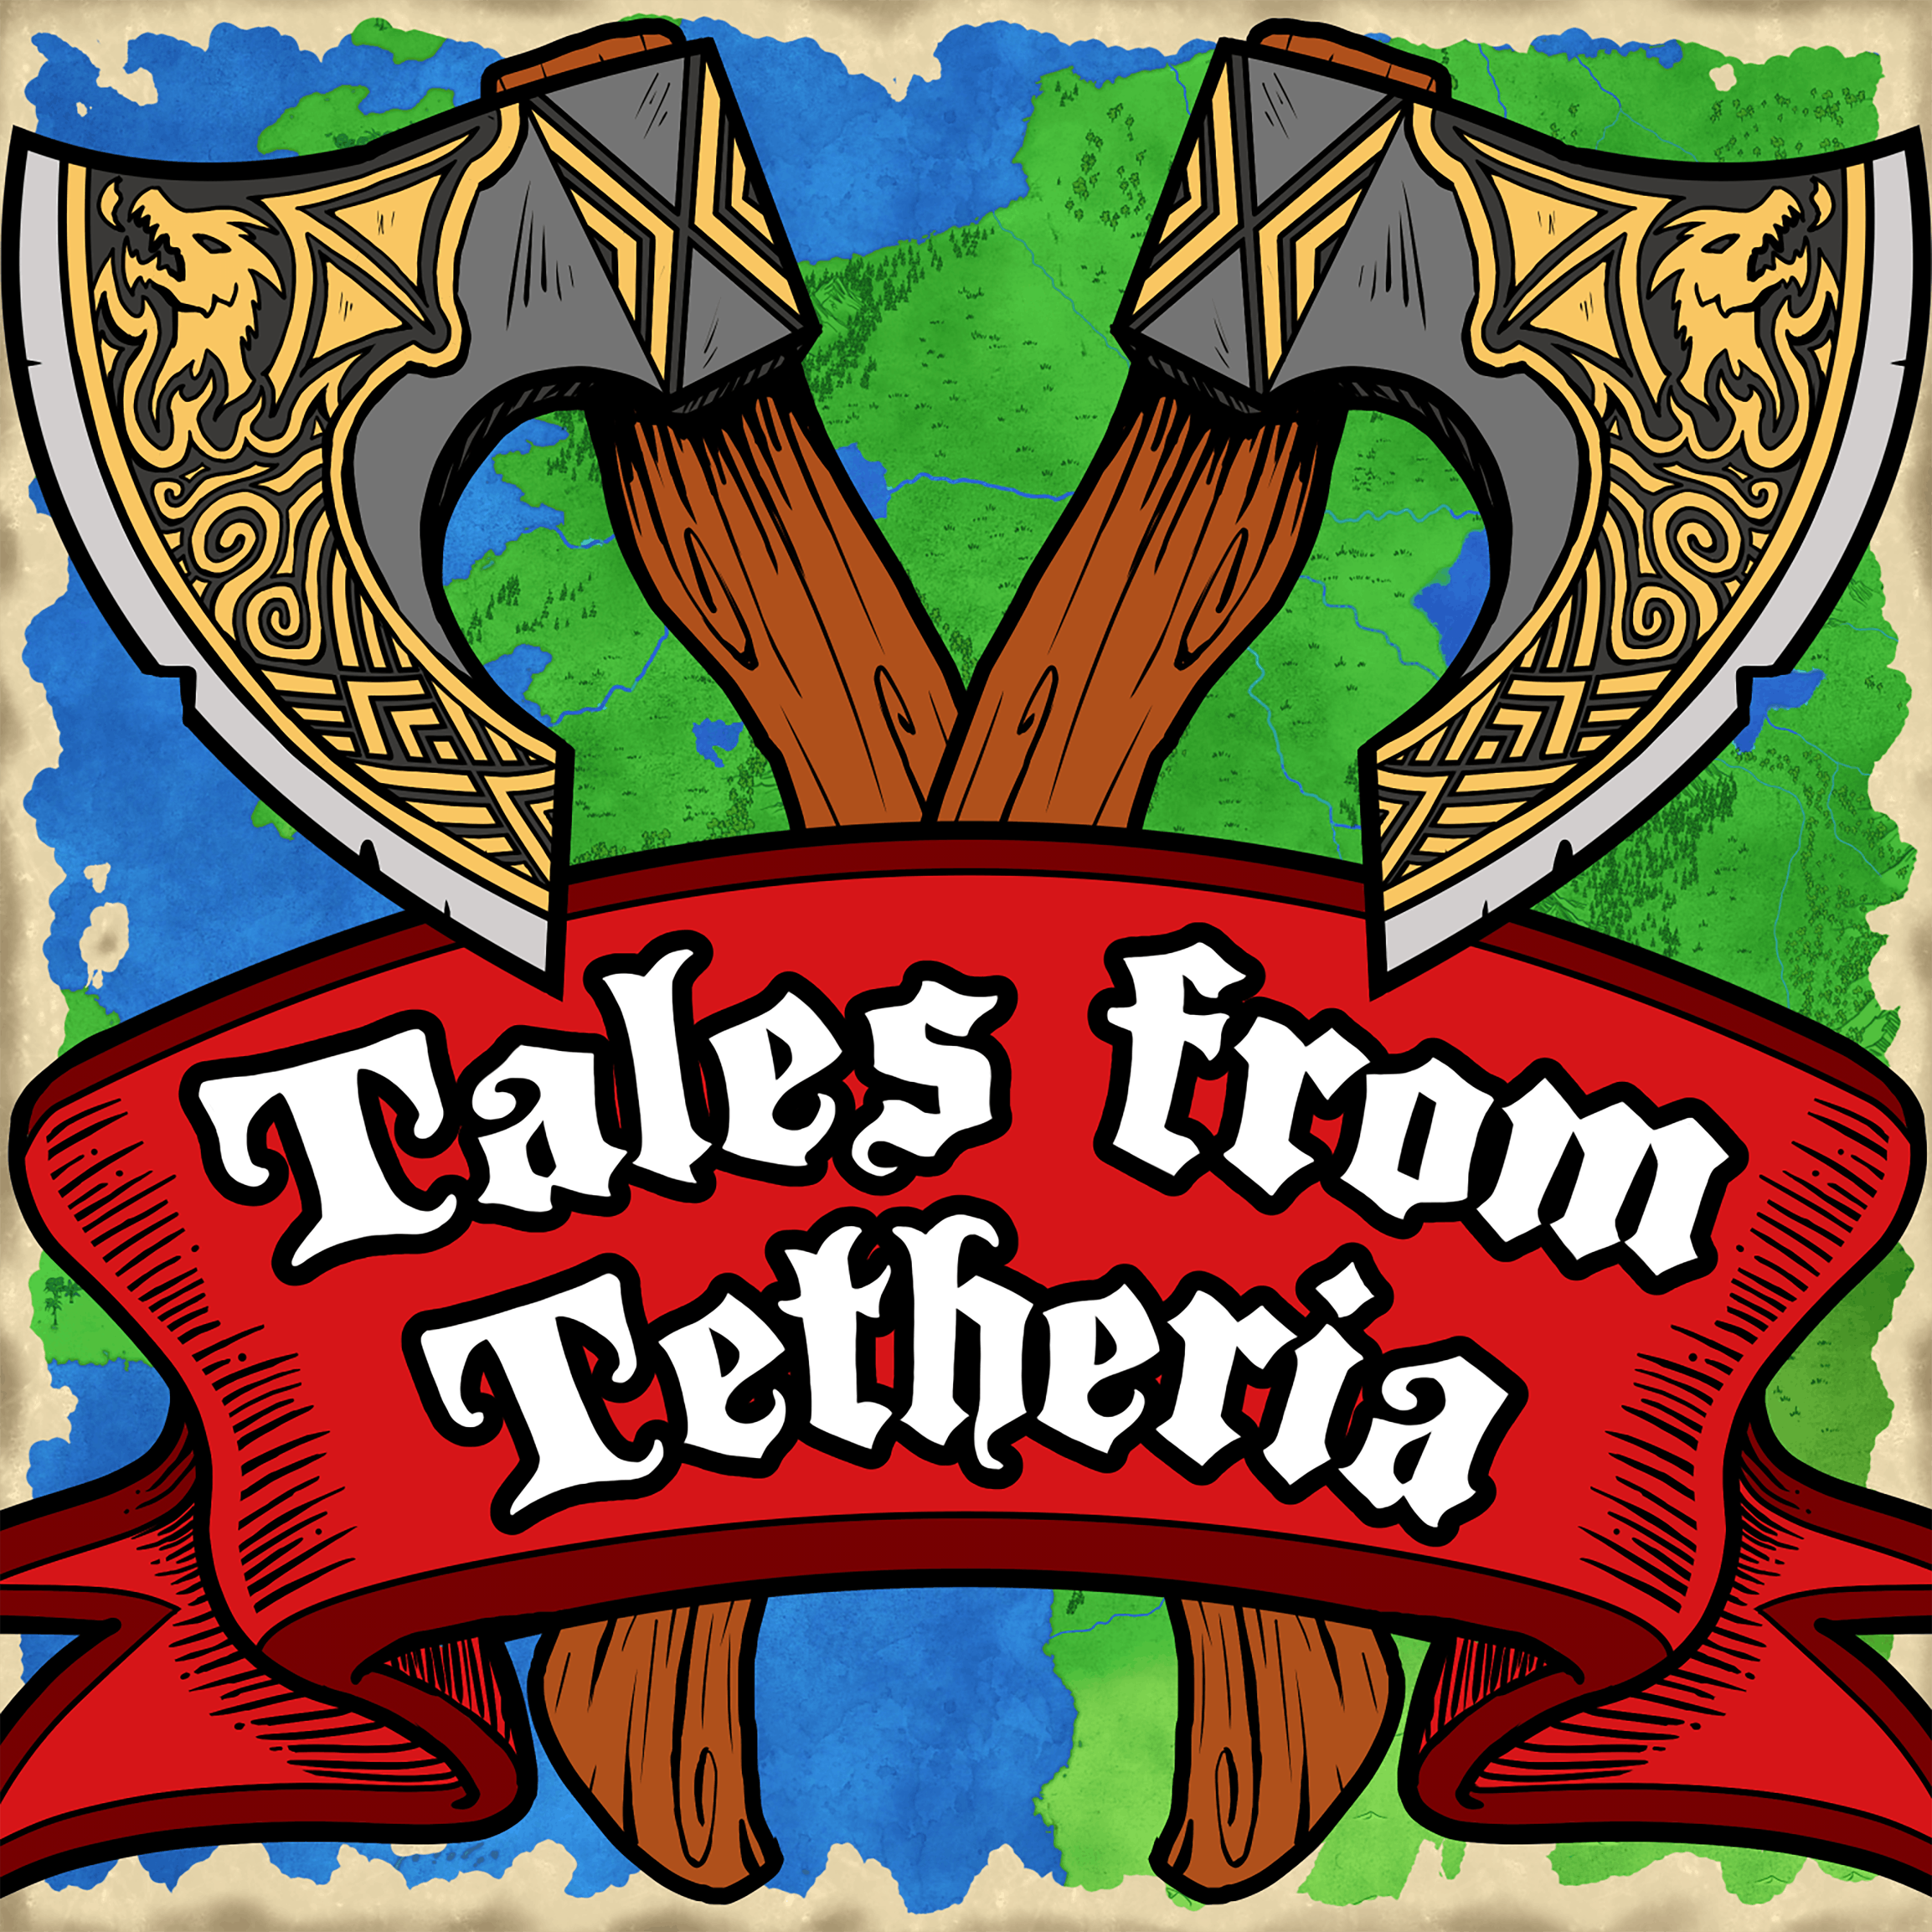 Tales from Tetheria